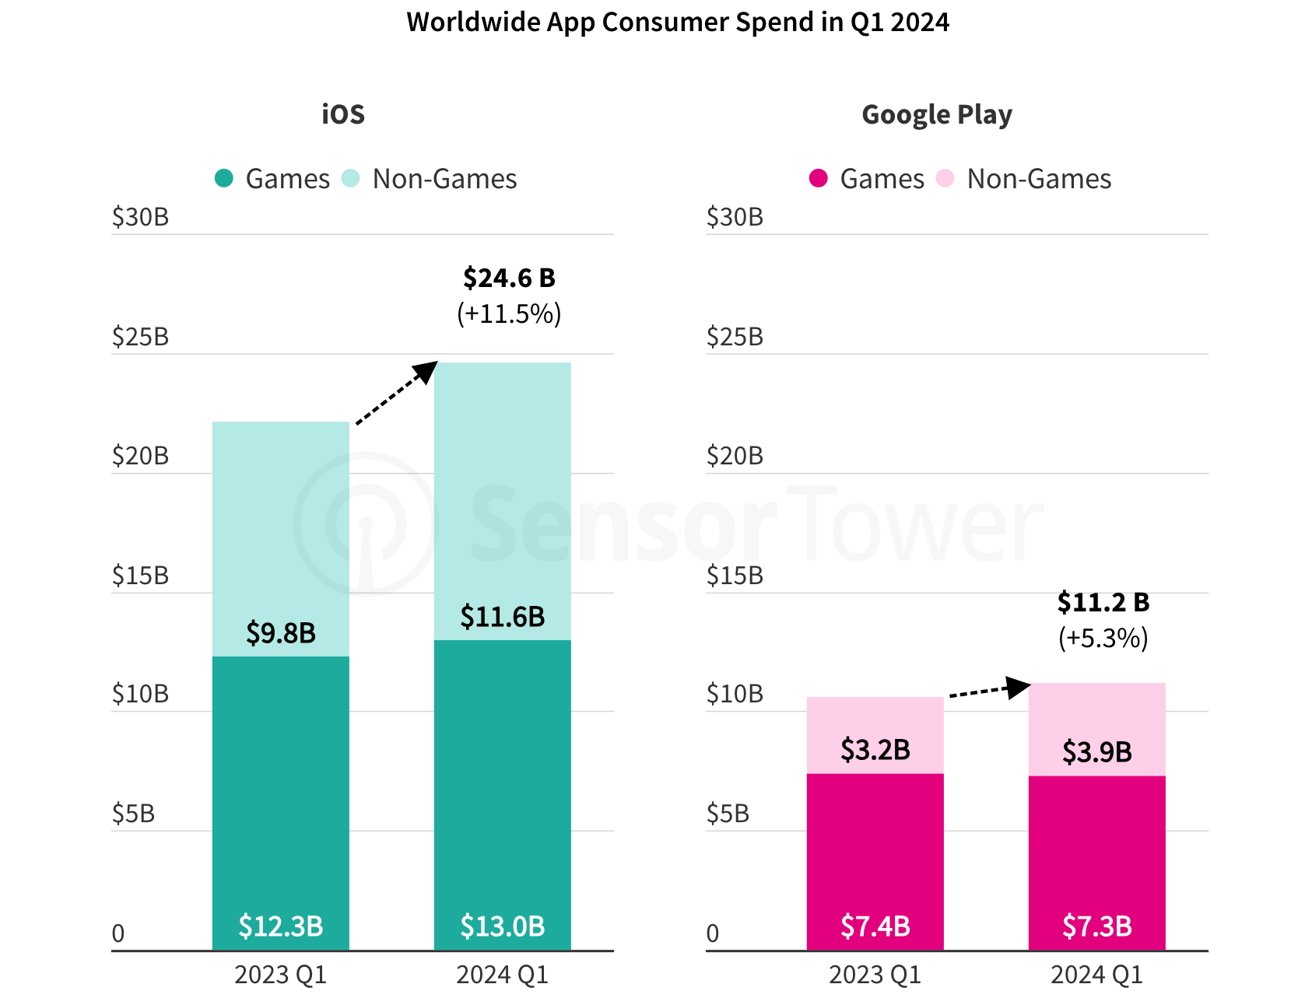 Bar charts showing iOS and Google Play consumer spend in Q1 2023 and Q1 2024, divided into Games and Non-Games categories.